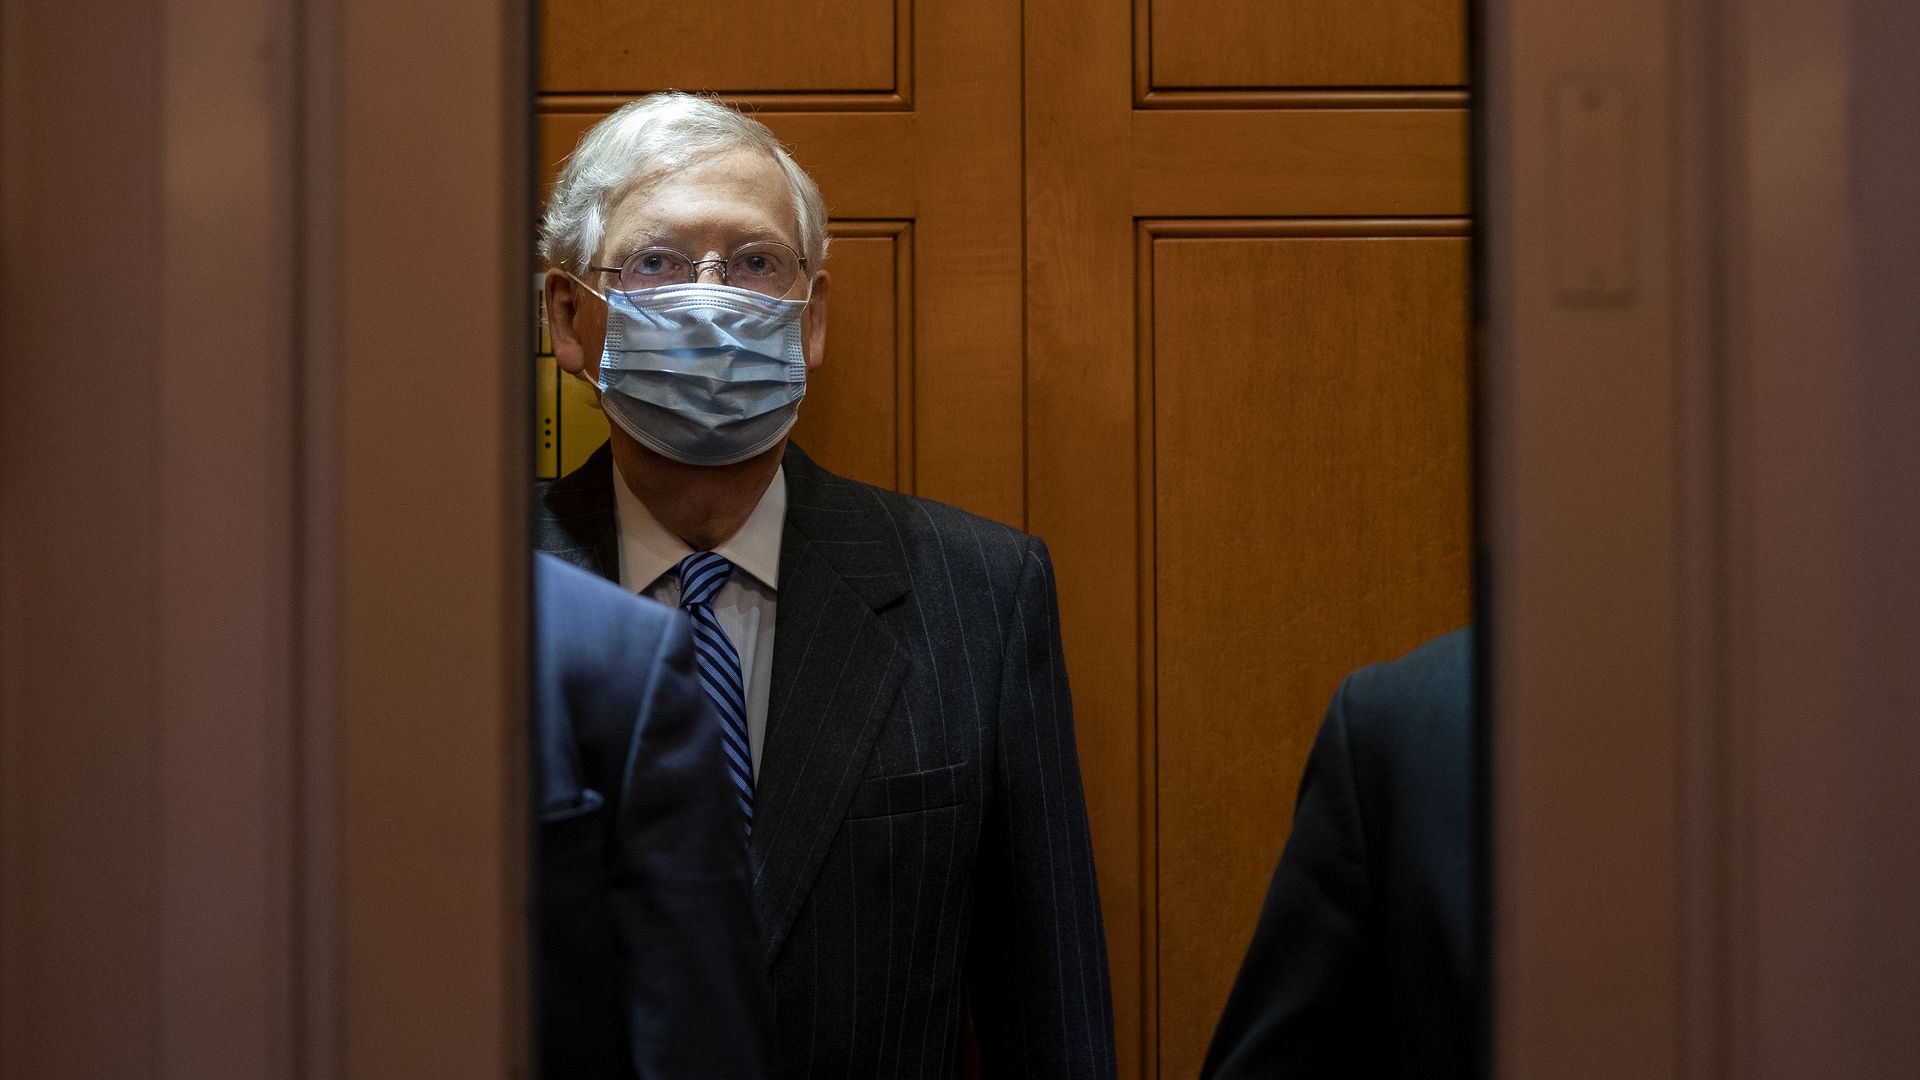 McConnell stands in an elevator while wearing a facemask